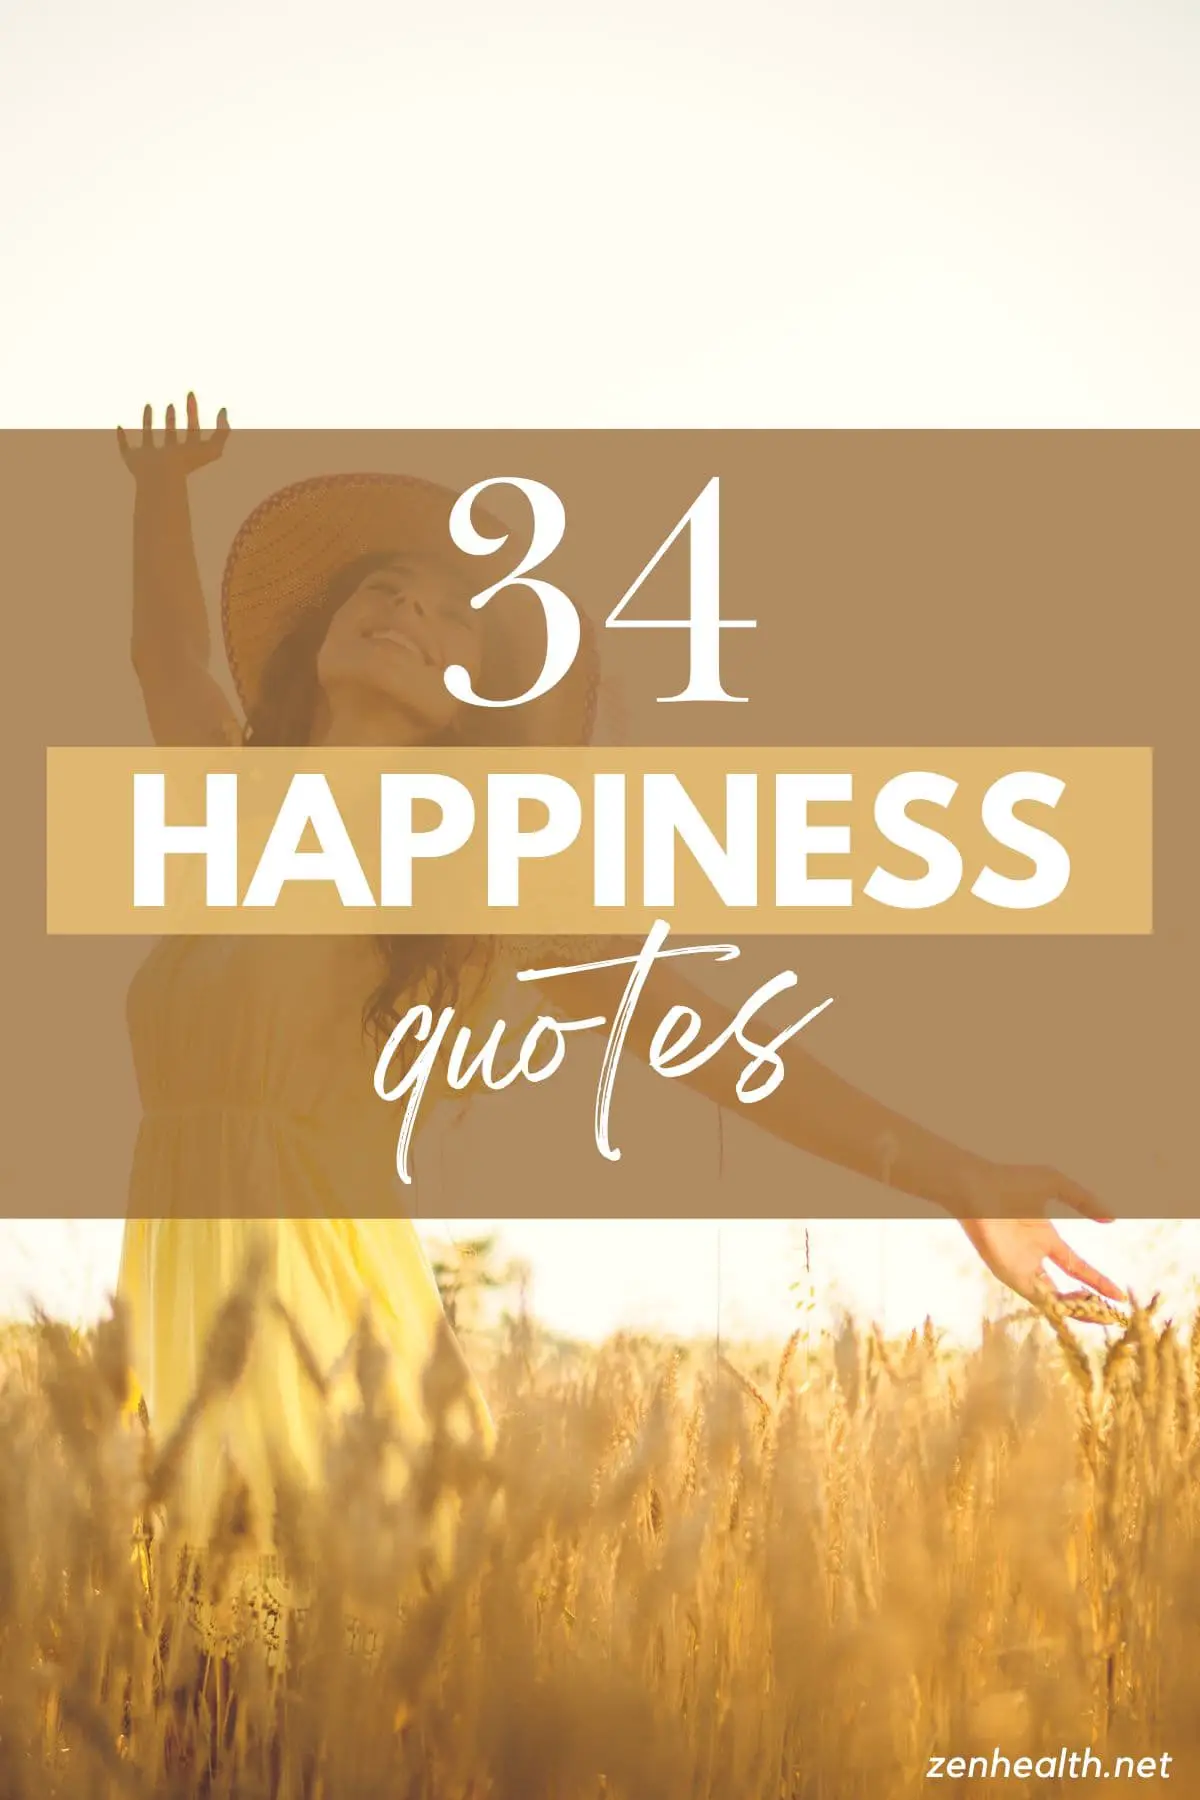 Happiness Quotes: Smile, Laugh and Enjoy These 34 Quotes - Zenhealth